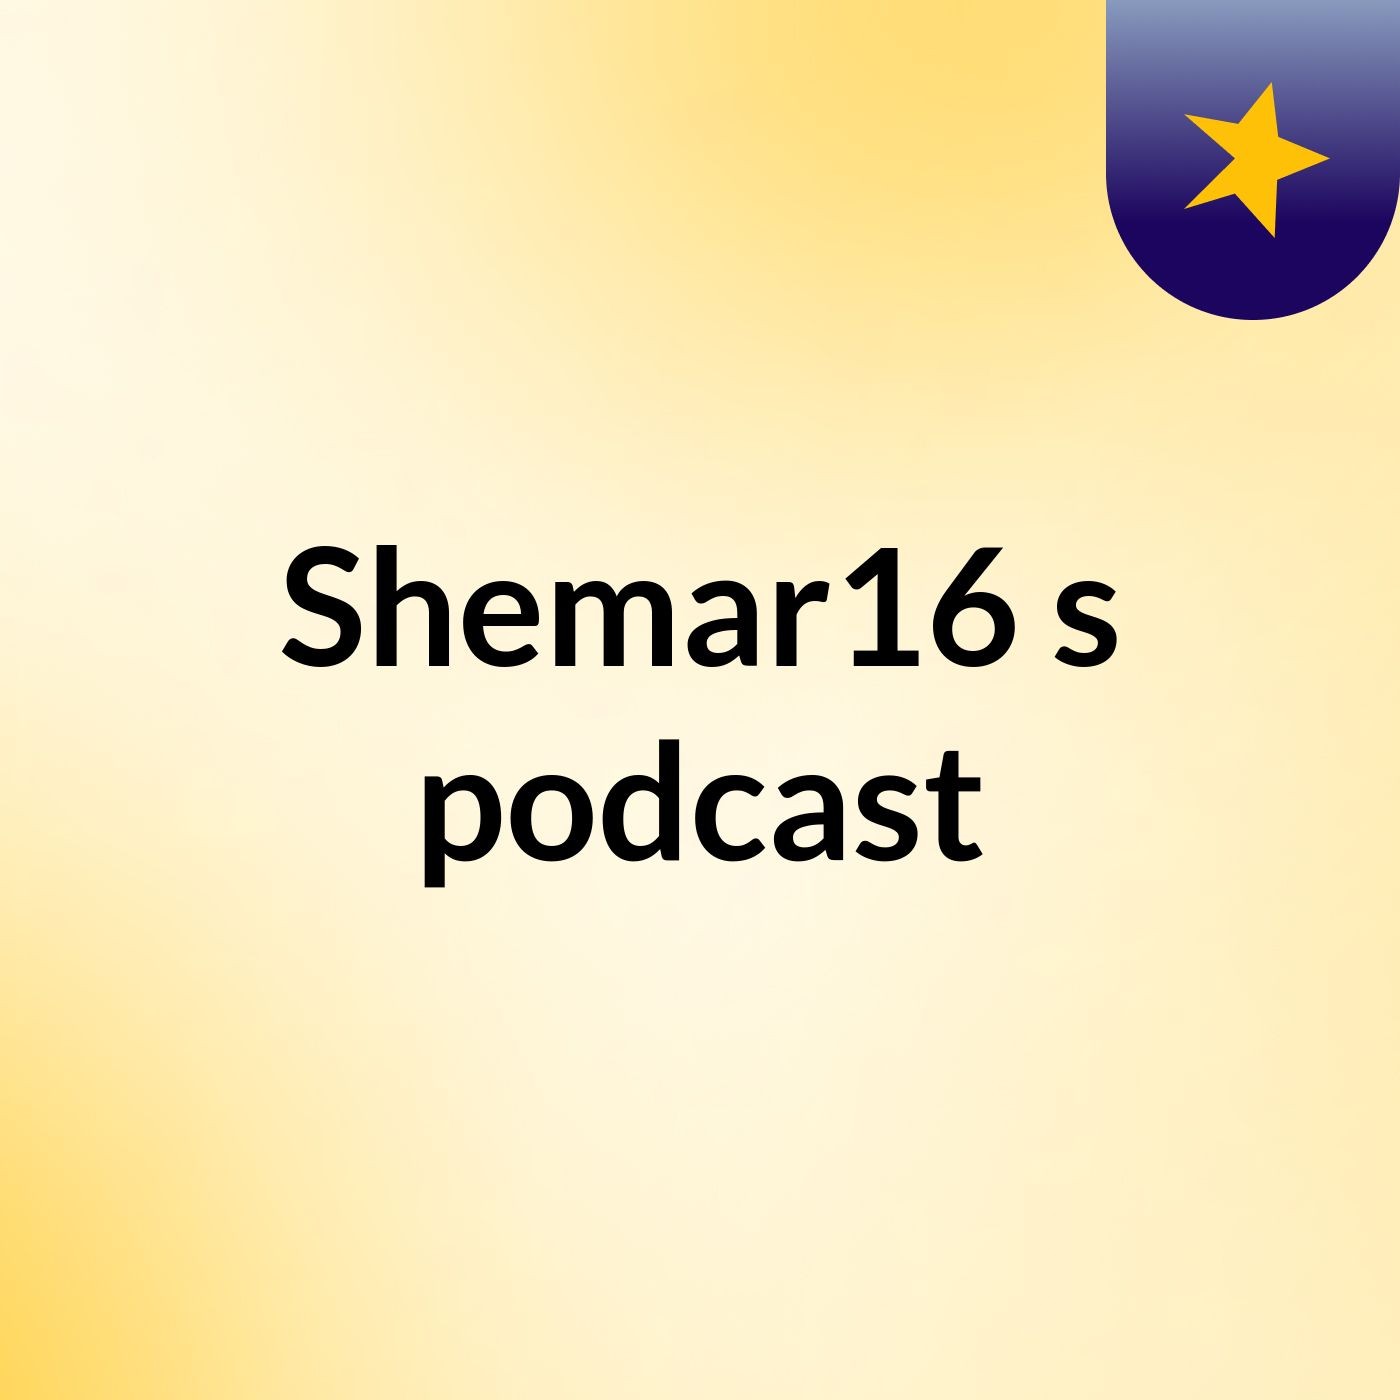 Shemar16's podcast